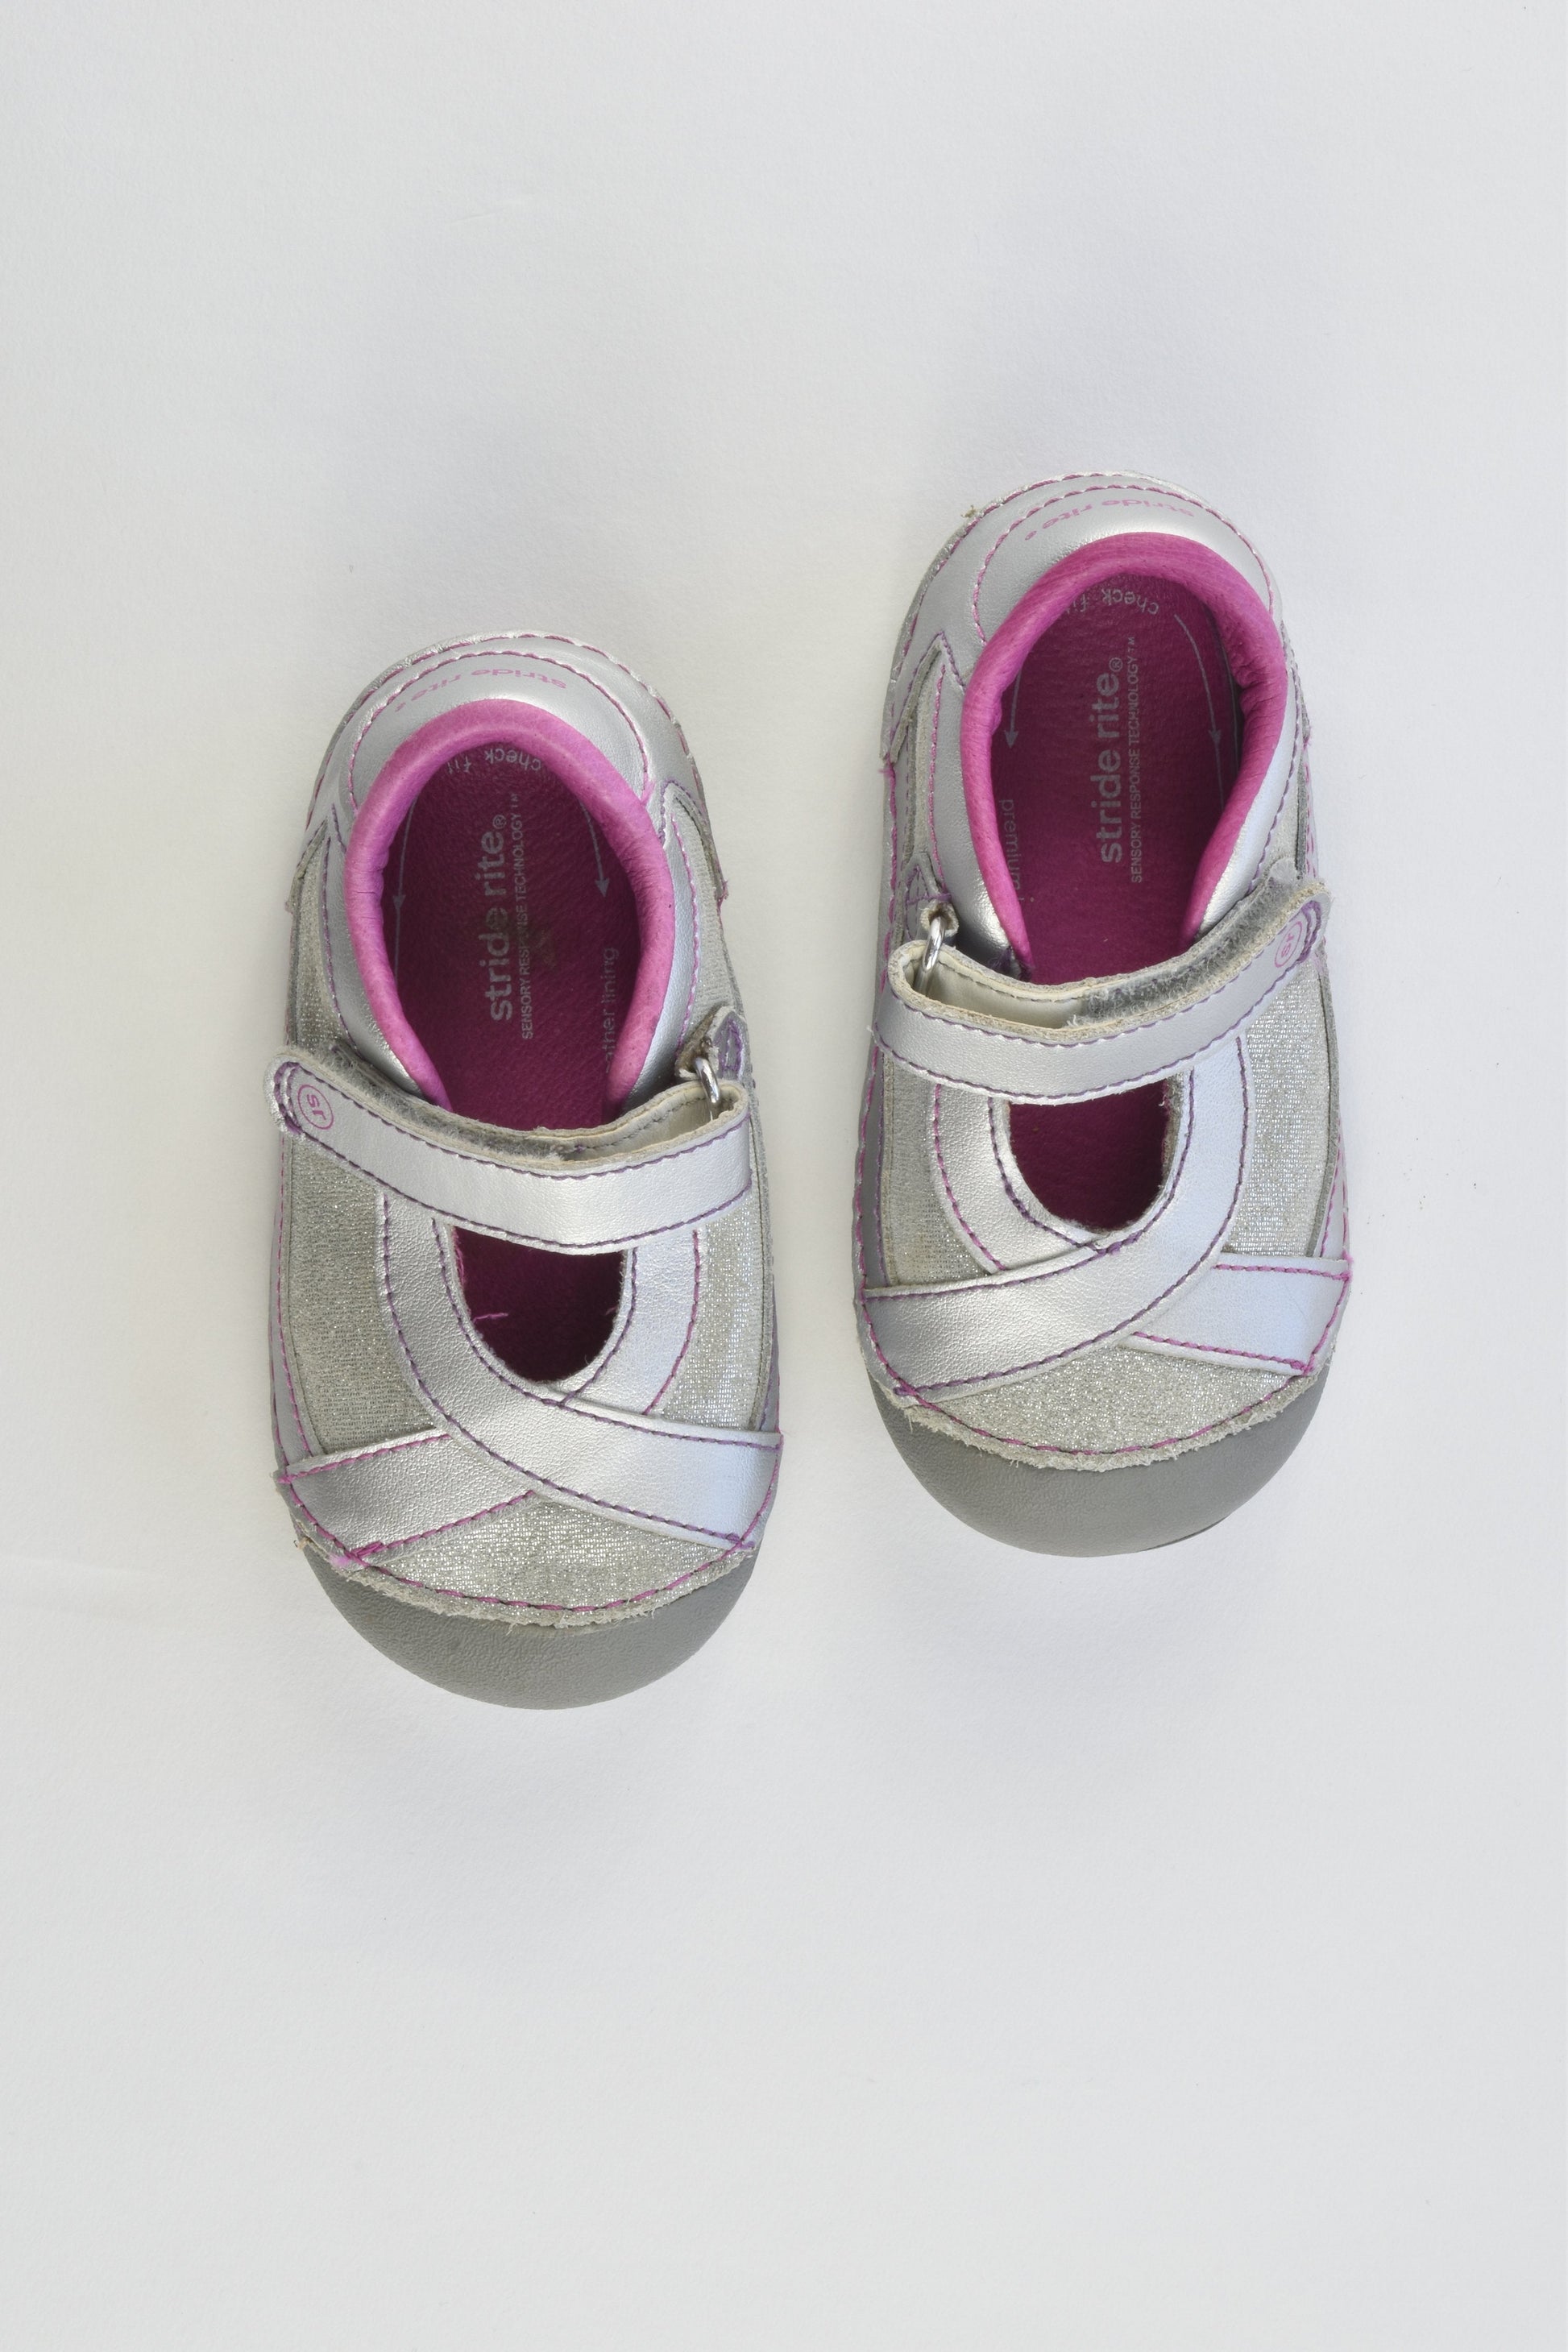 Stride Rite Size UK 5.5 Leather Shoes